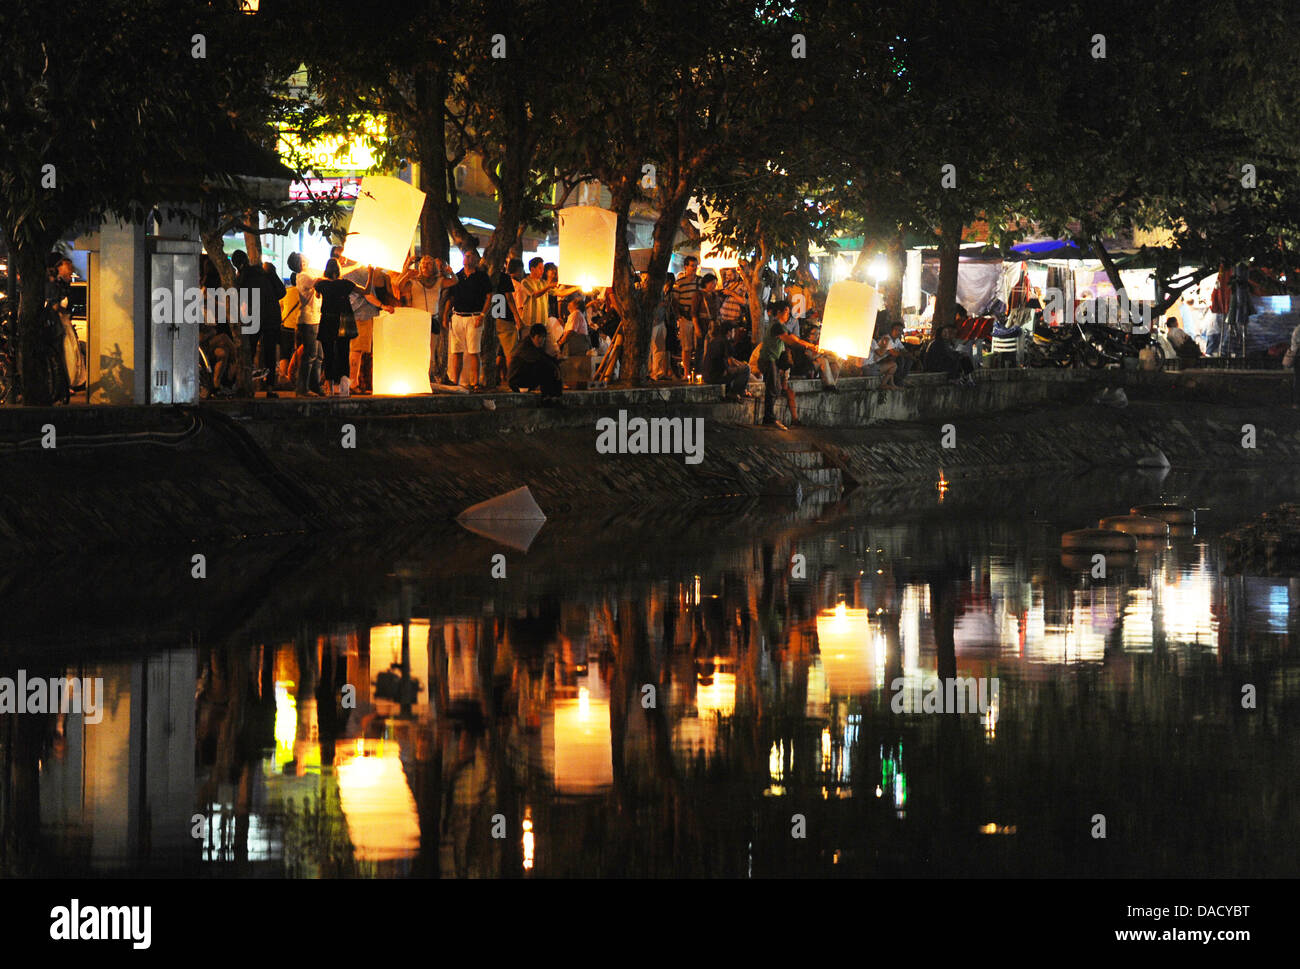 People light paper lanterns called Khom Loi at the Ping river during the festival of lights Loy Krathong in Chiang Mai, Thailand, 10 November 2011. The festival is celebrated in the whole country during full moon of the twelfth month of the year and originates from a Hindu tradition. Photo: Jens Kalaene Stock Photo